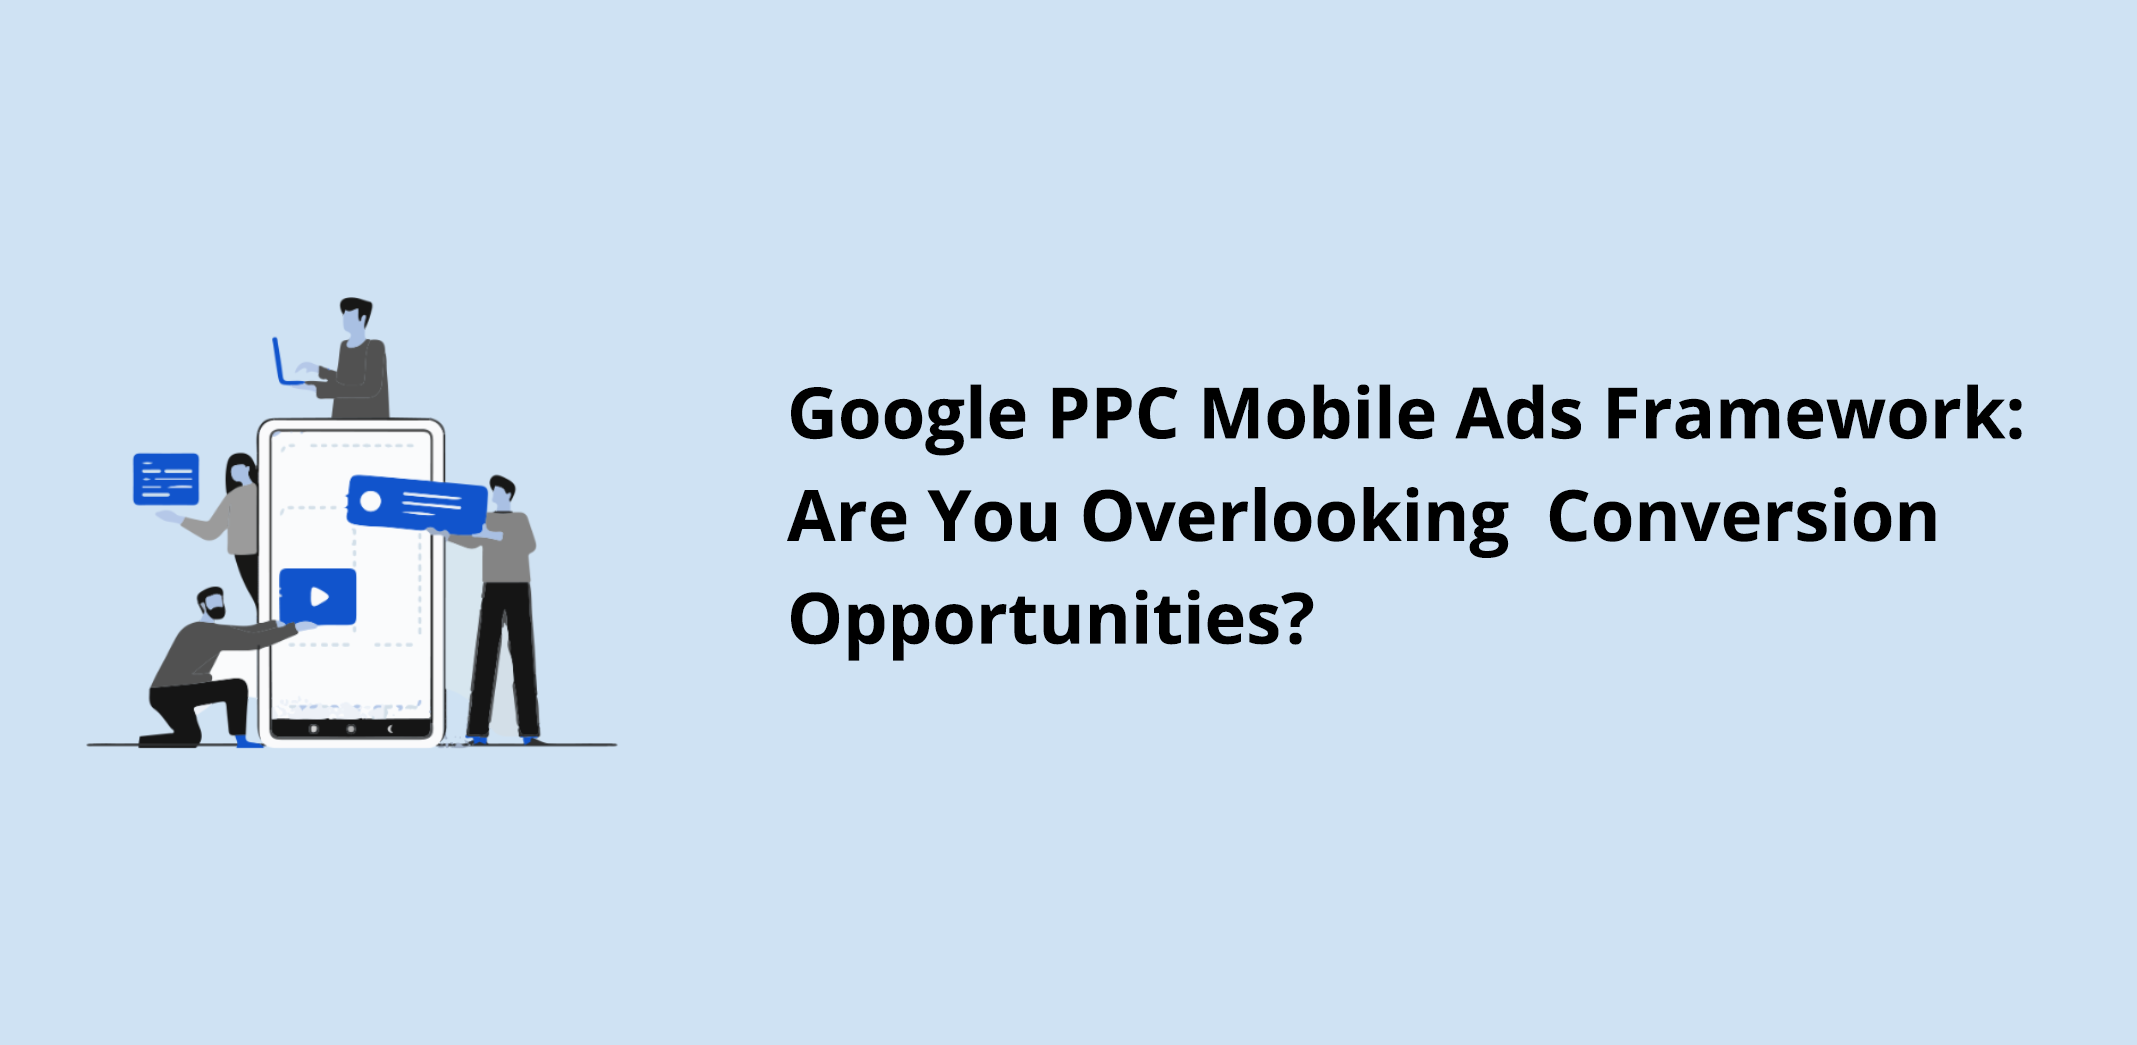 Google PPC Mobile Ads Framework: Are You Overlooking Conversion Opportunities?